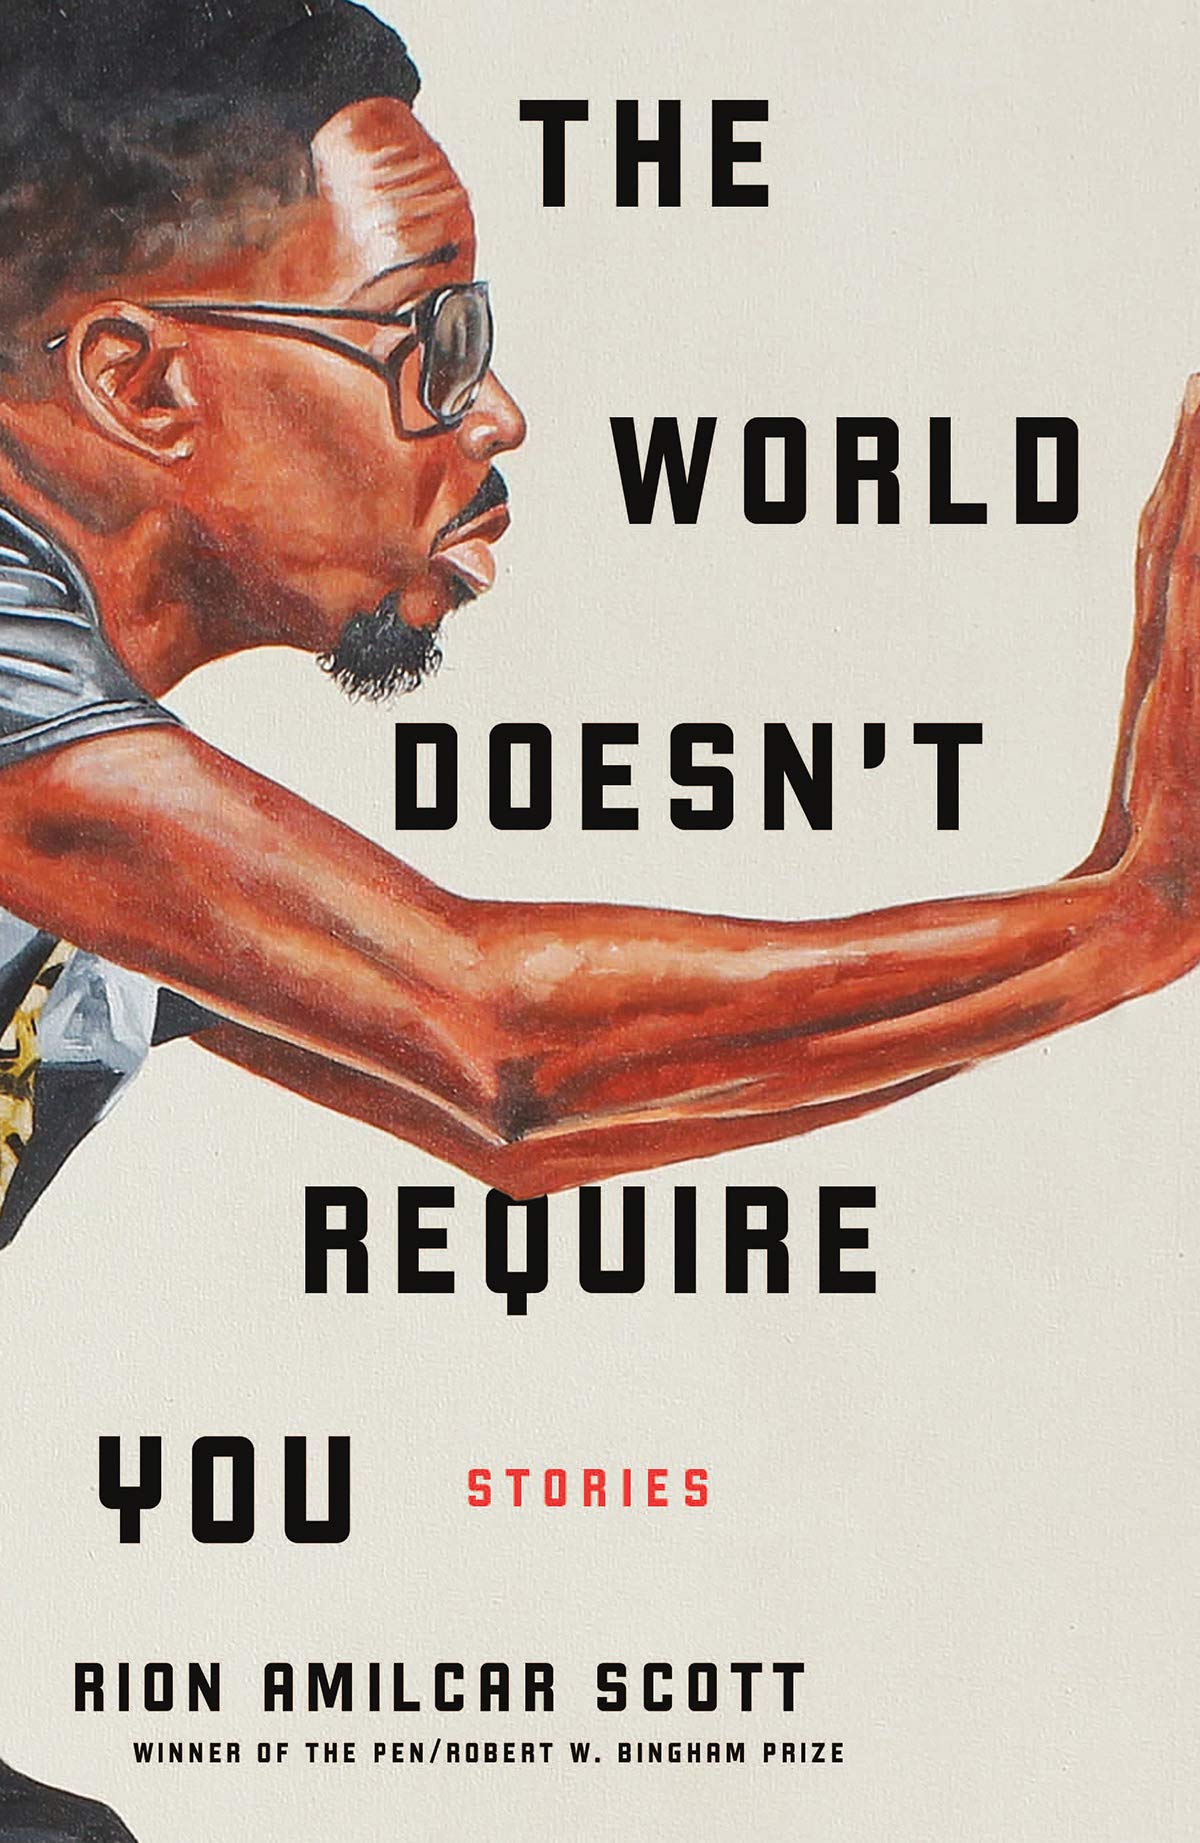 A striking book cover featuring a stylized illustration of a man gazing intently to the side, with the bold title "the world doesn't require you" centered and the author's name, rion amilcar scott, just below. a caption emphasizing the book's acclaim, noting it as a winner of the pen/robert w. bingham prize, adds to the powerful impression.